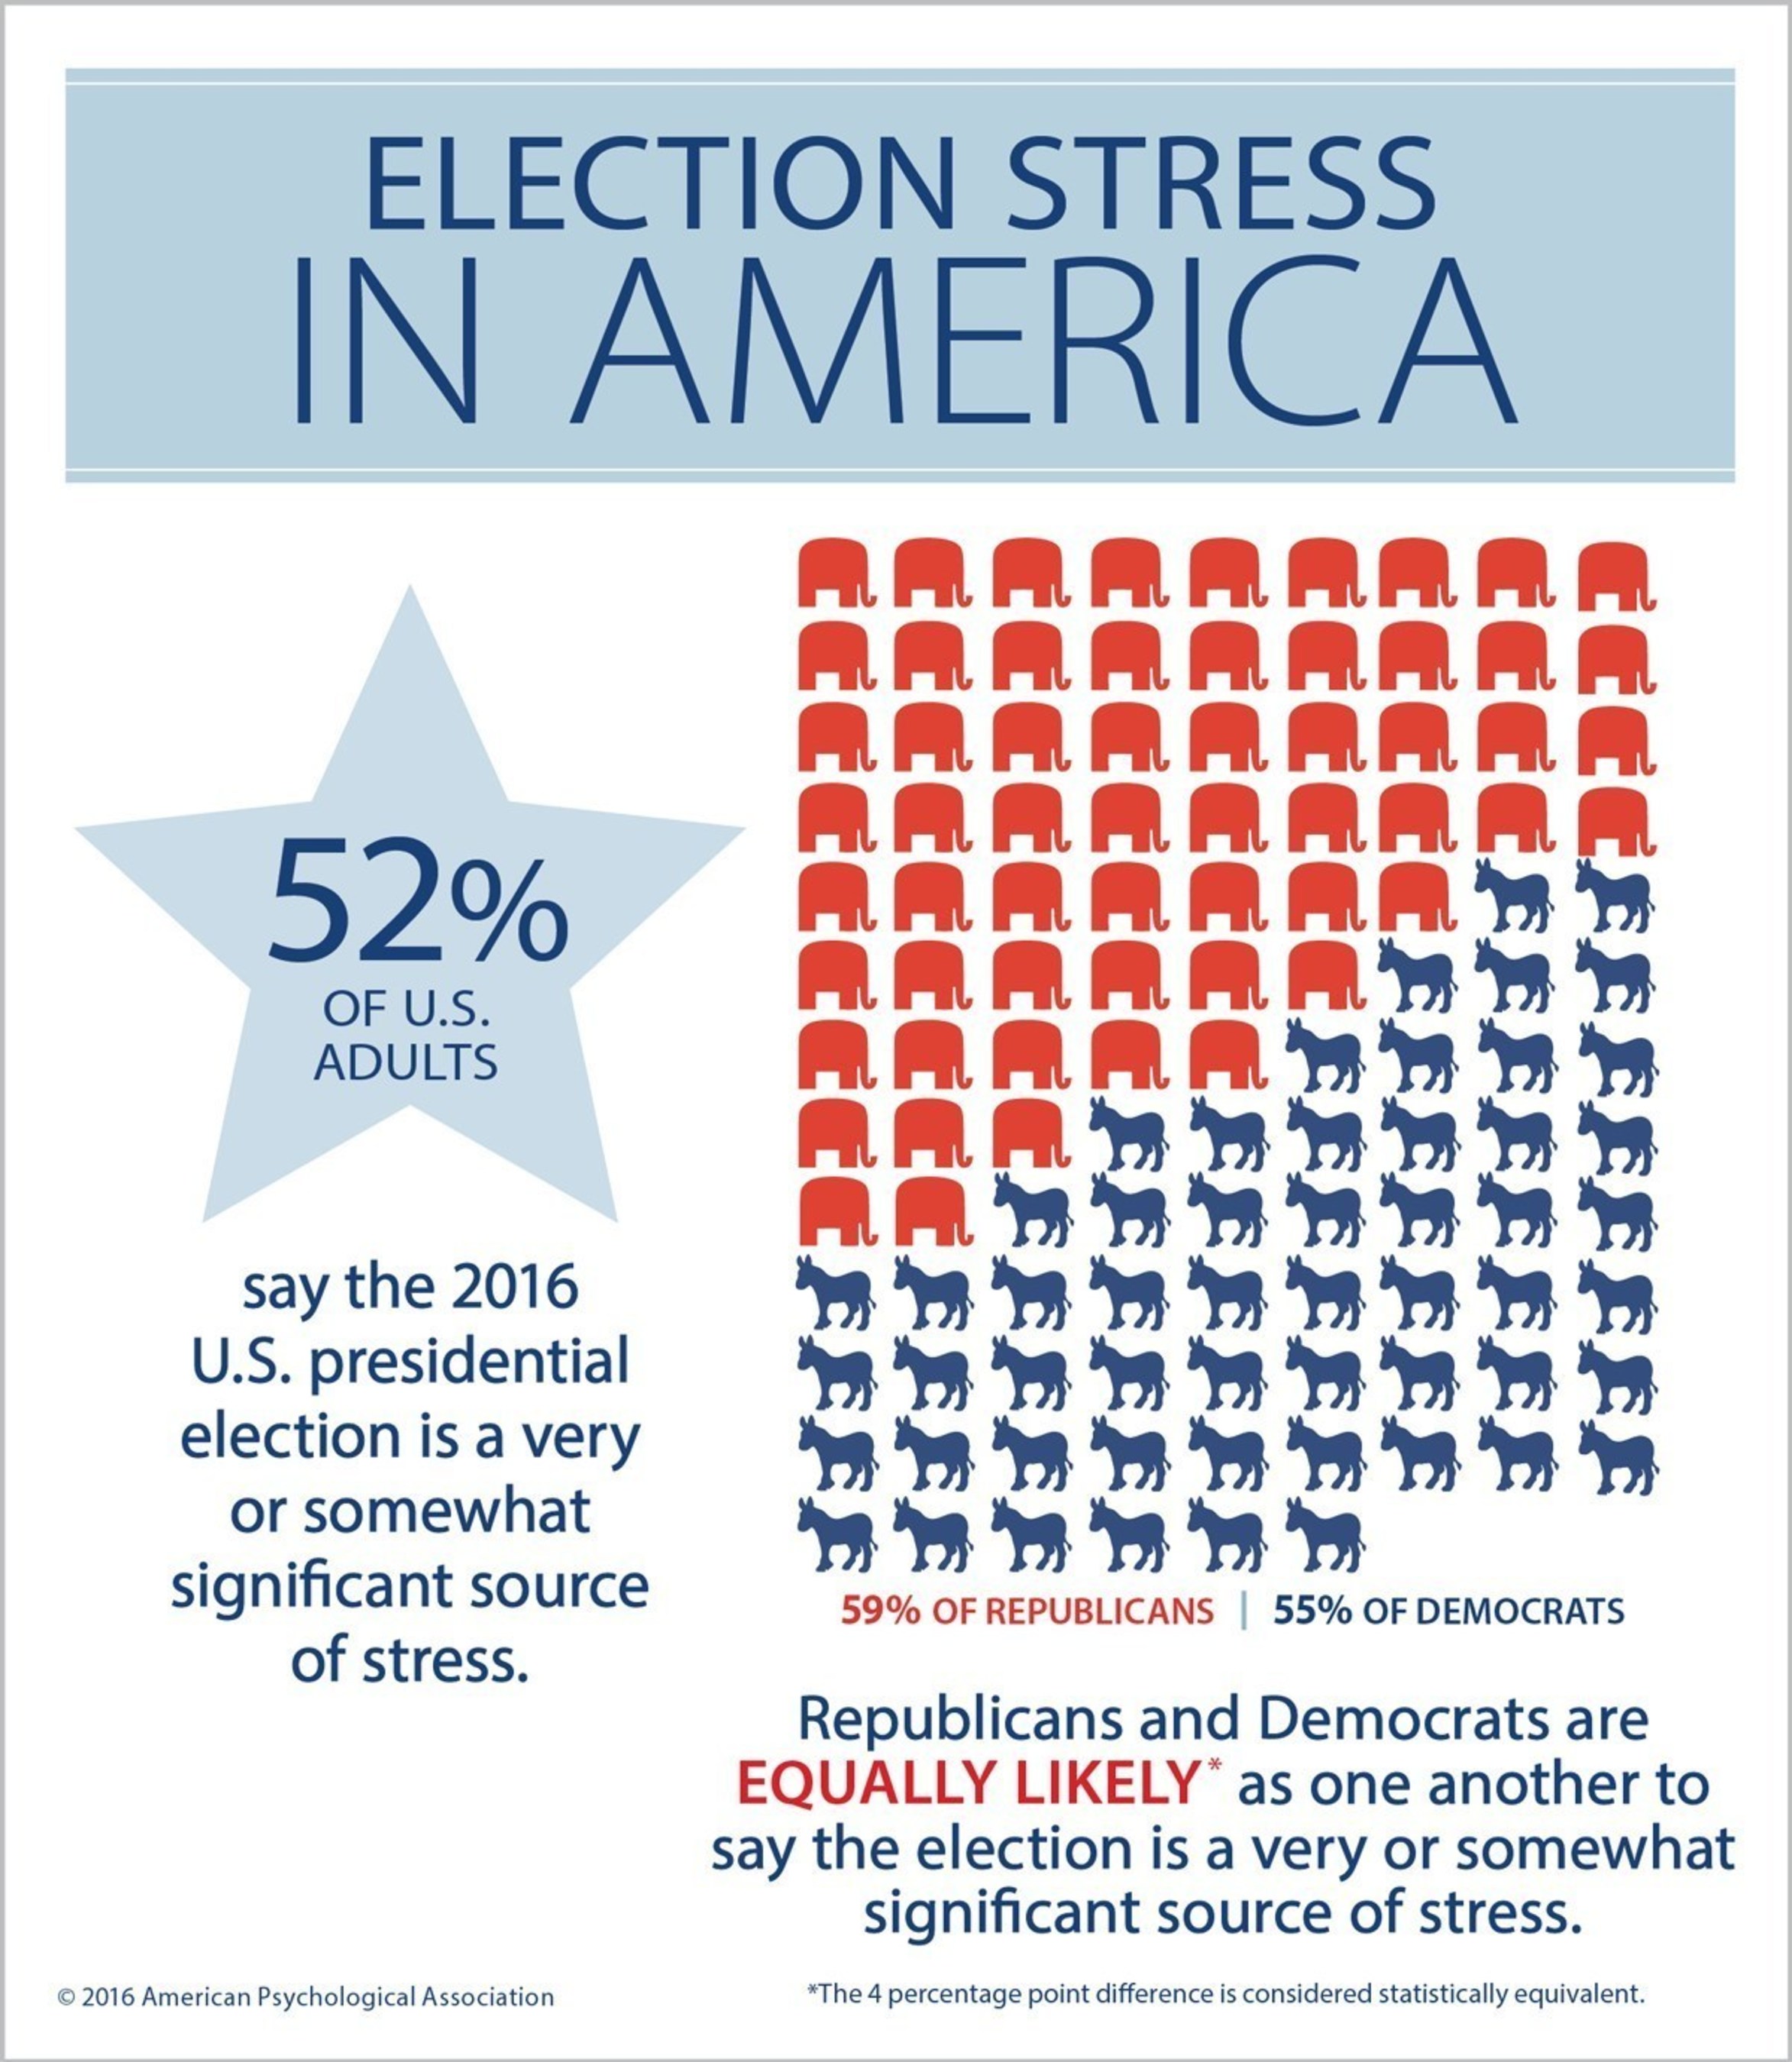 Republicans and Democrats are equally likely as one another to say the election is a significant source of stress.